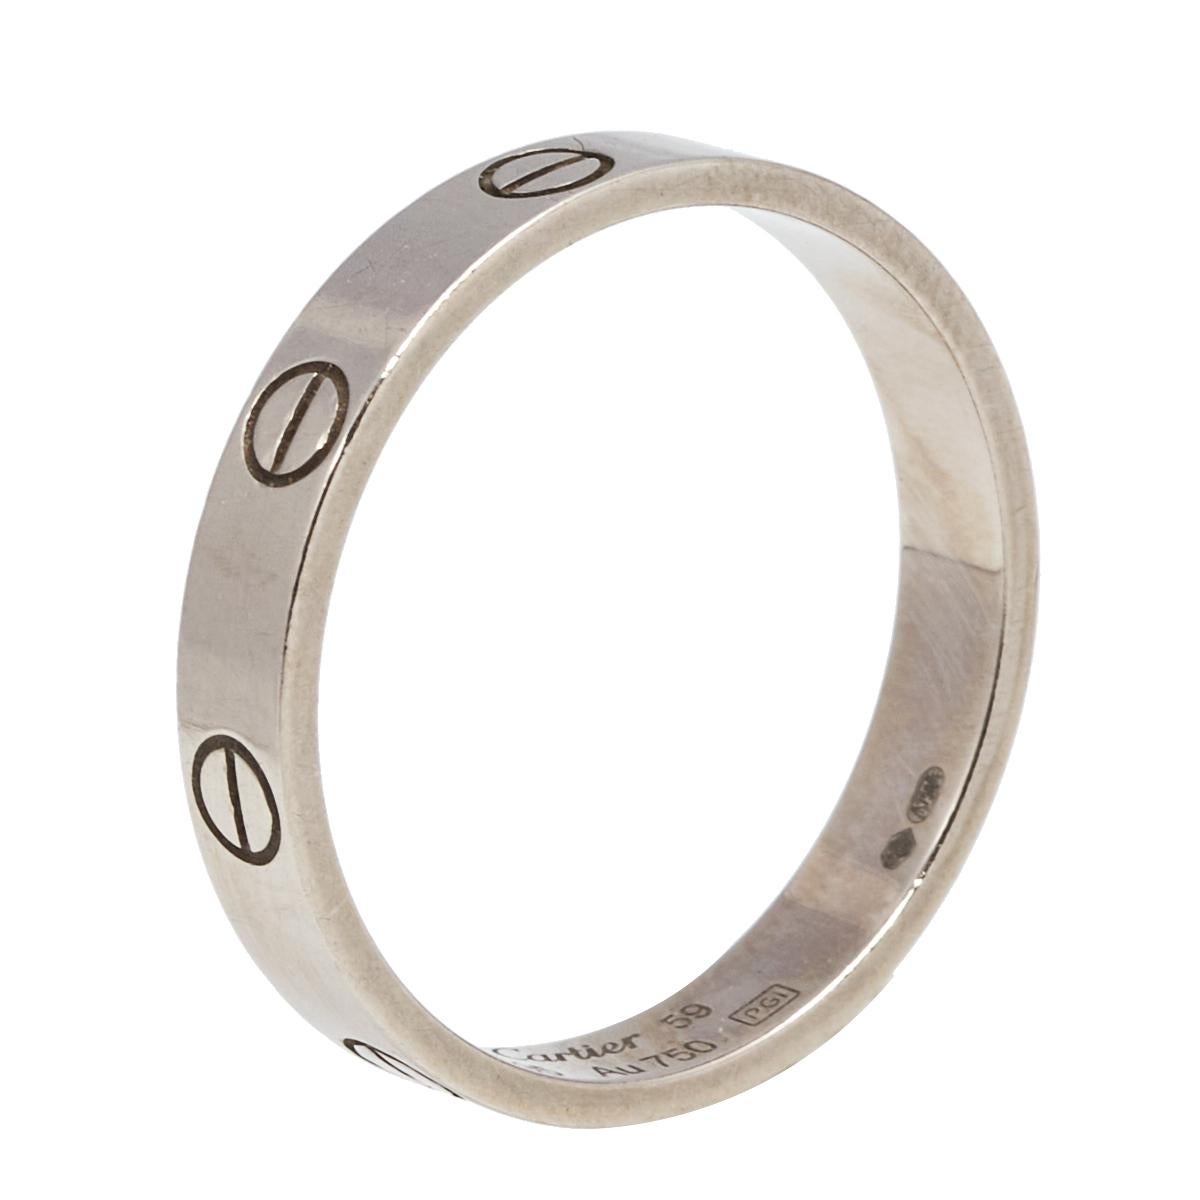 59 mm ring size